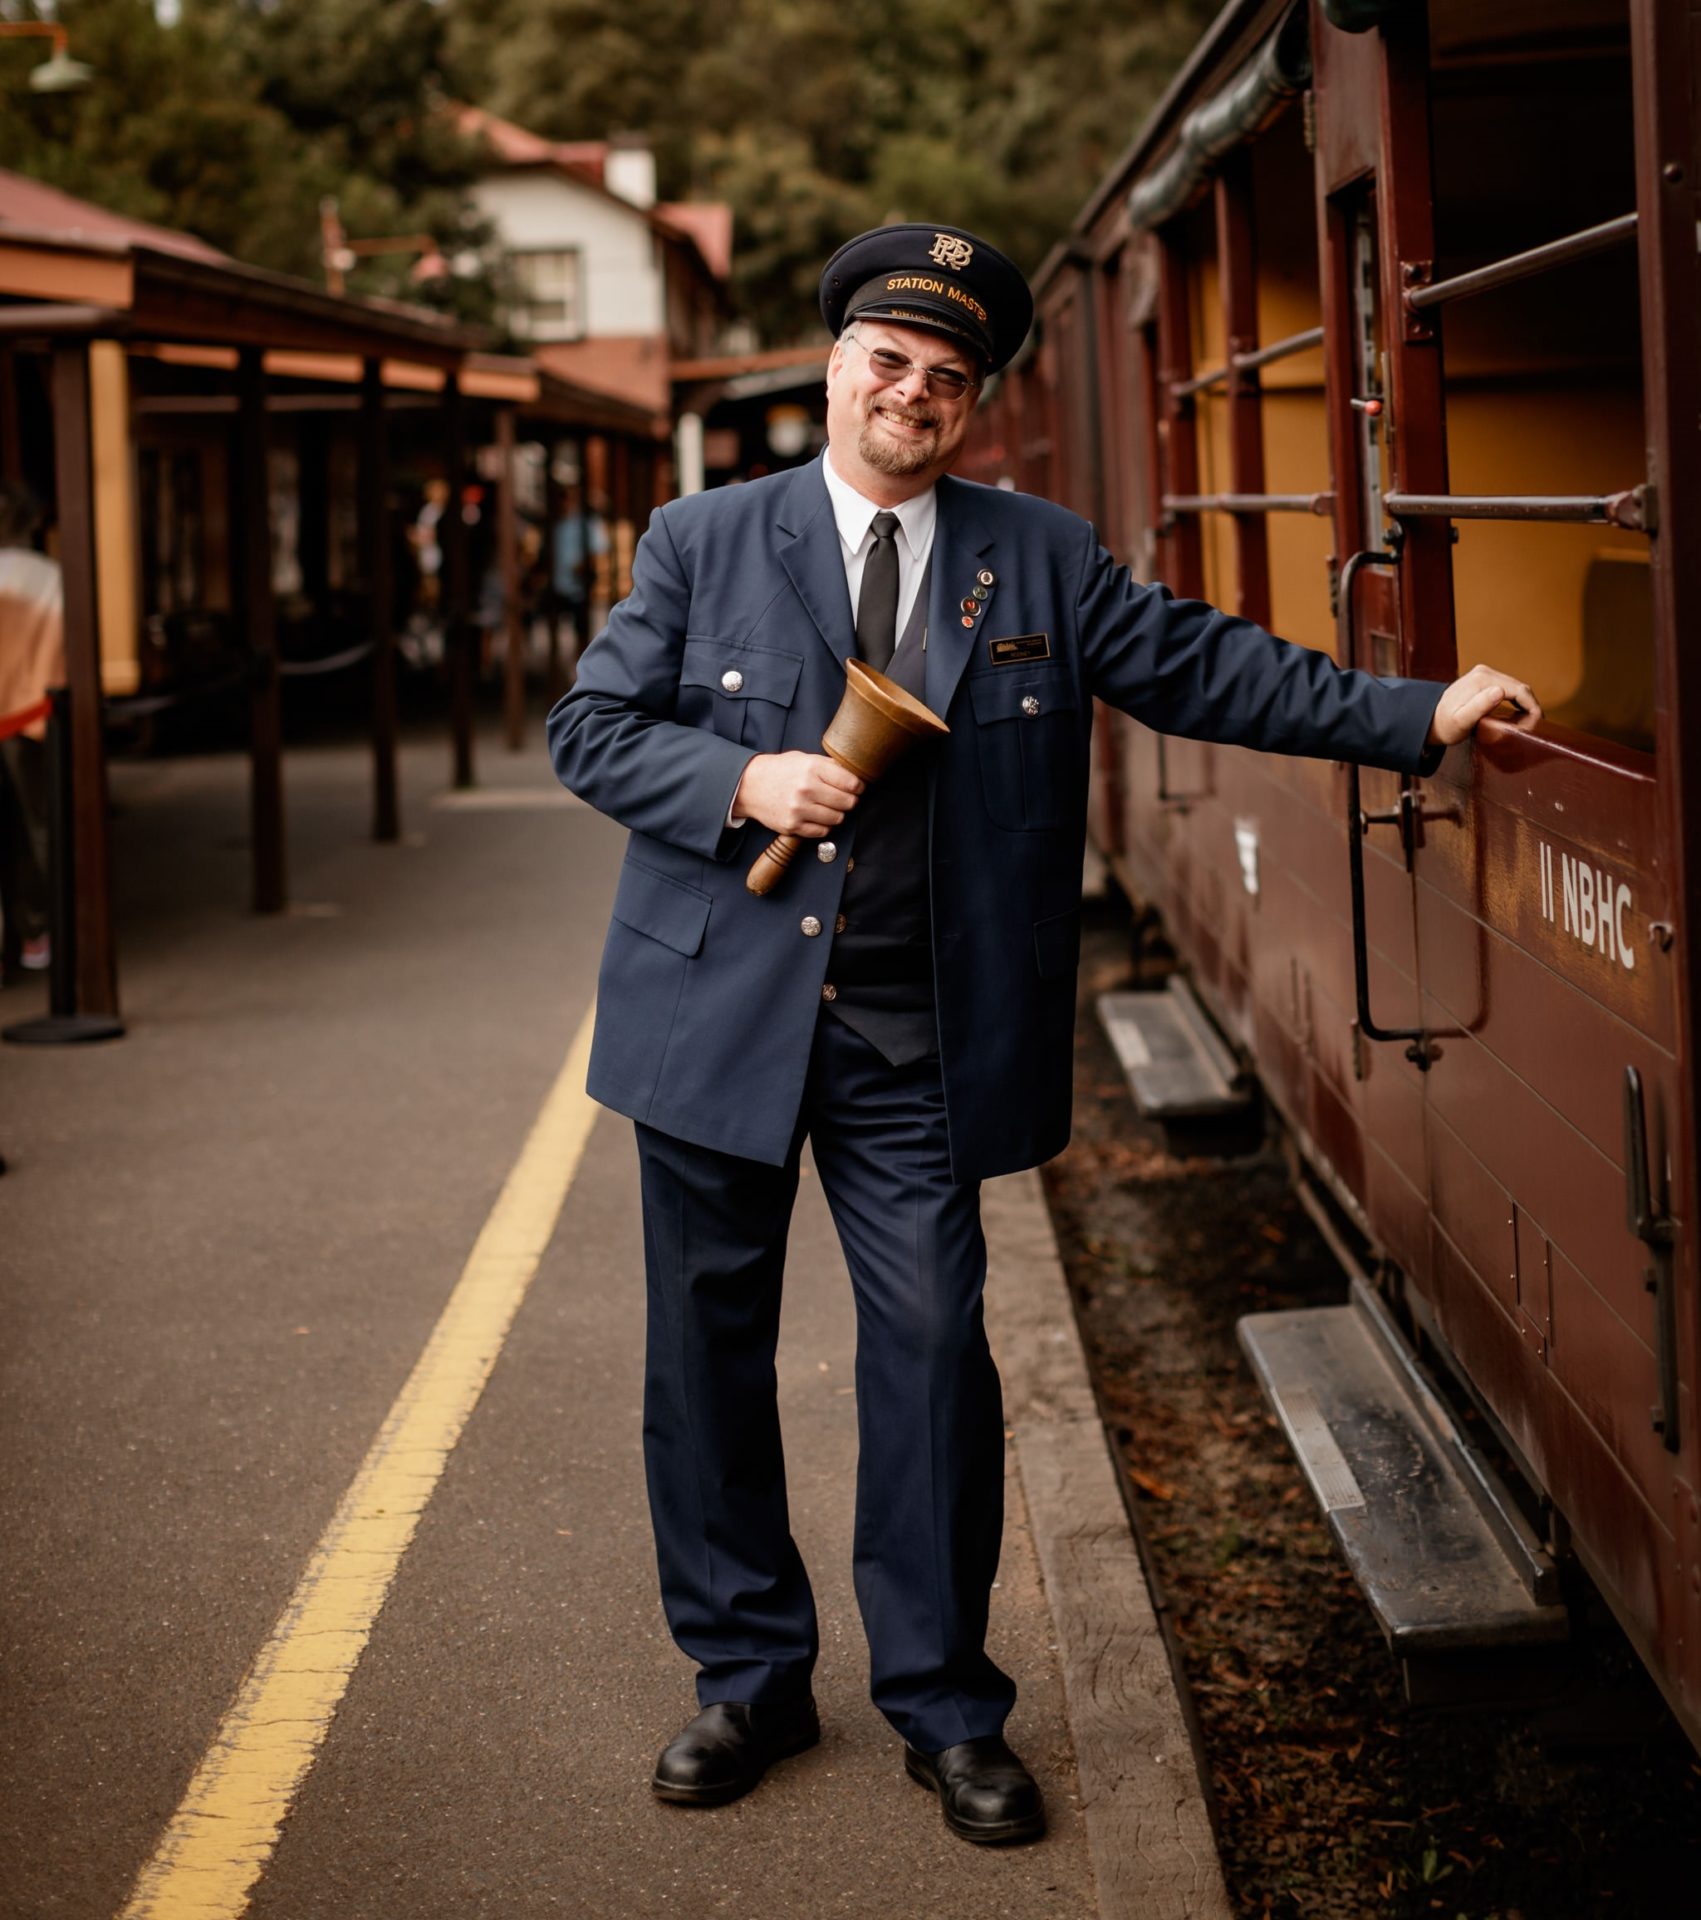 The Puffing Billy Station Master is holds onto the door handle of one of Puffing Billy's open side carriages. He is holding a bell in his right hand and is smiling.